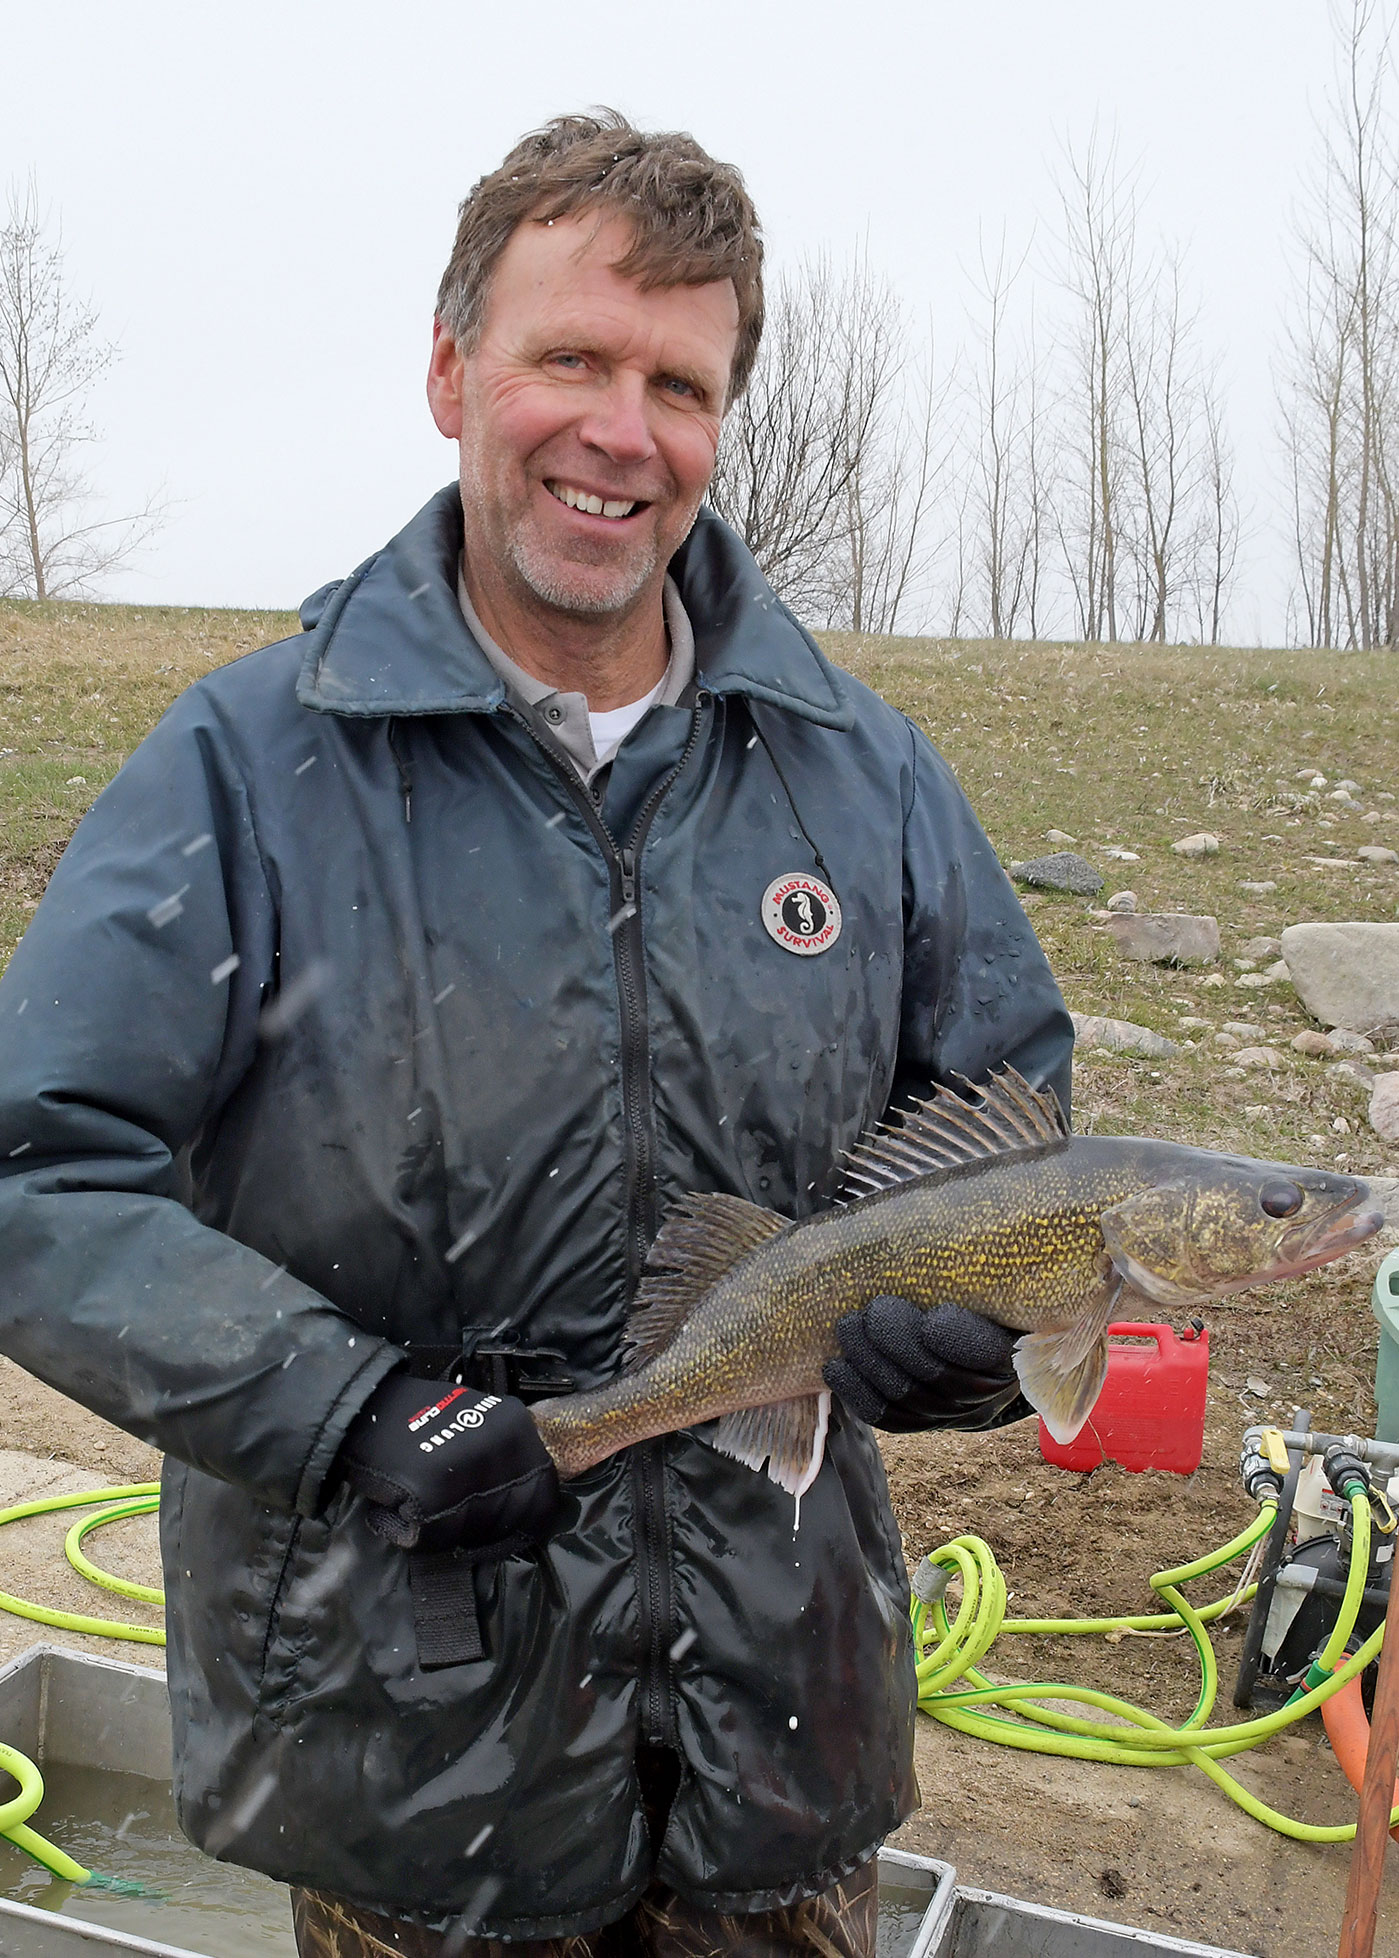 Fisheries Division Chief Greg Power